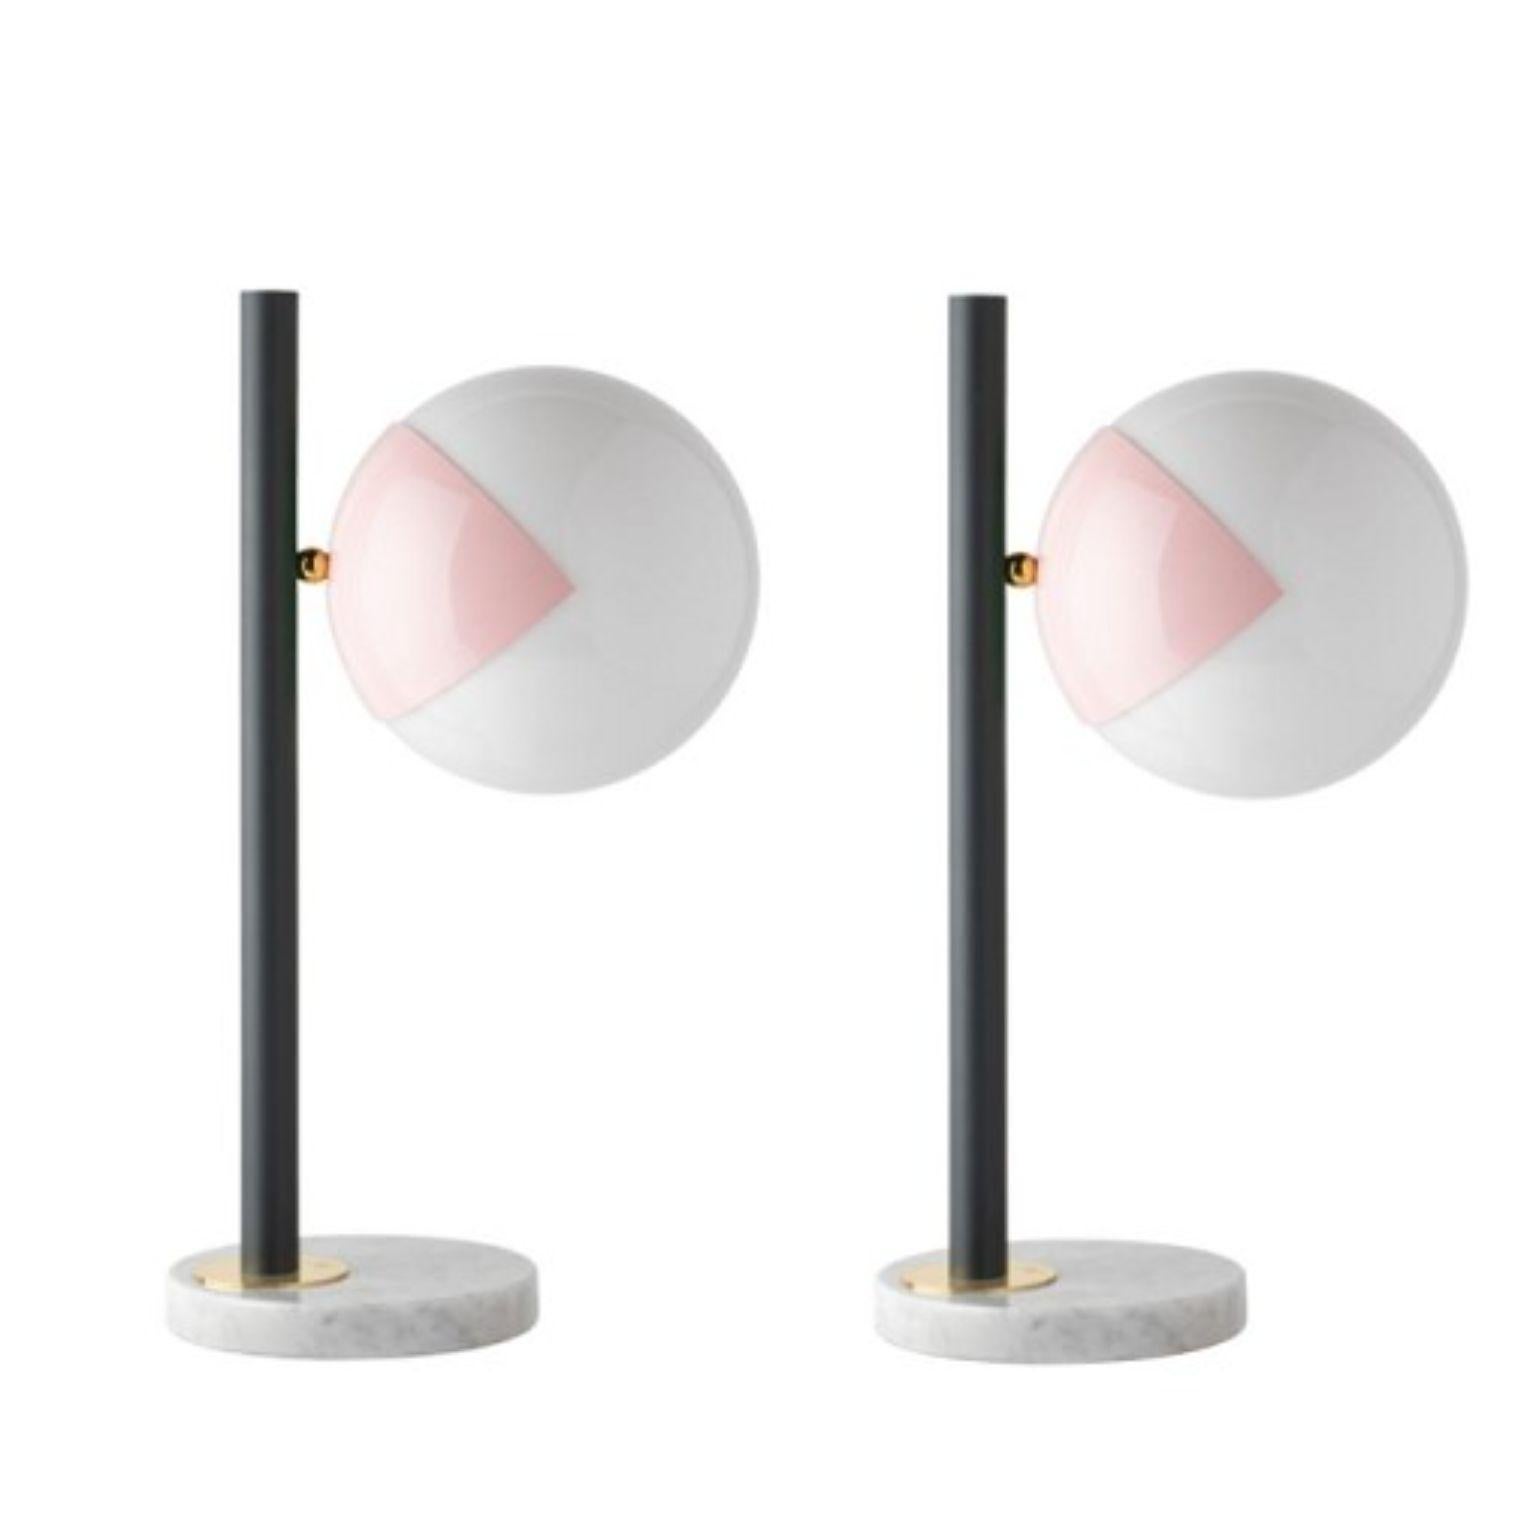 Pink dimmable table lamp pop-up black by Magic Circus Editions
Dimensions: Ø 22 x 30 x 53 cm 
Materials: Carrara marble base, smooth brass tube, glossy mouth blown glass

All our lamps can be wired according to each country. If sold to the USA